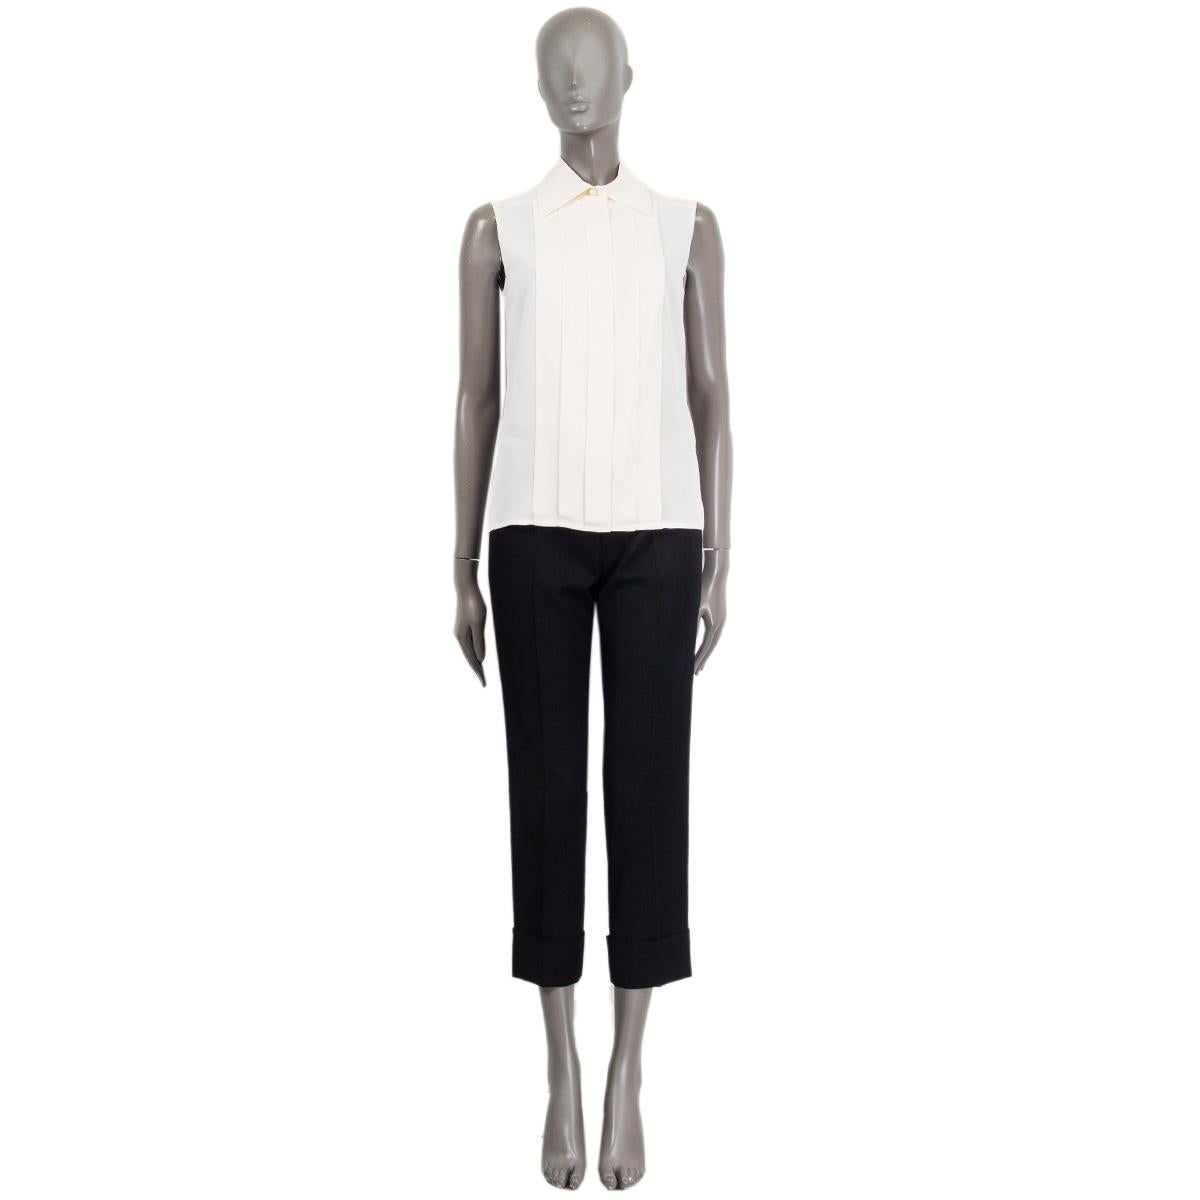 100% authentic Chanel sleeveless blouse in off-white silk (100%) with pleated front and flat collar. The blouse closes with six hidden 'Chanel Paris' buttons and one visible pearl CC button. Has been worn and is in excellent